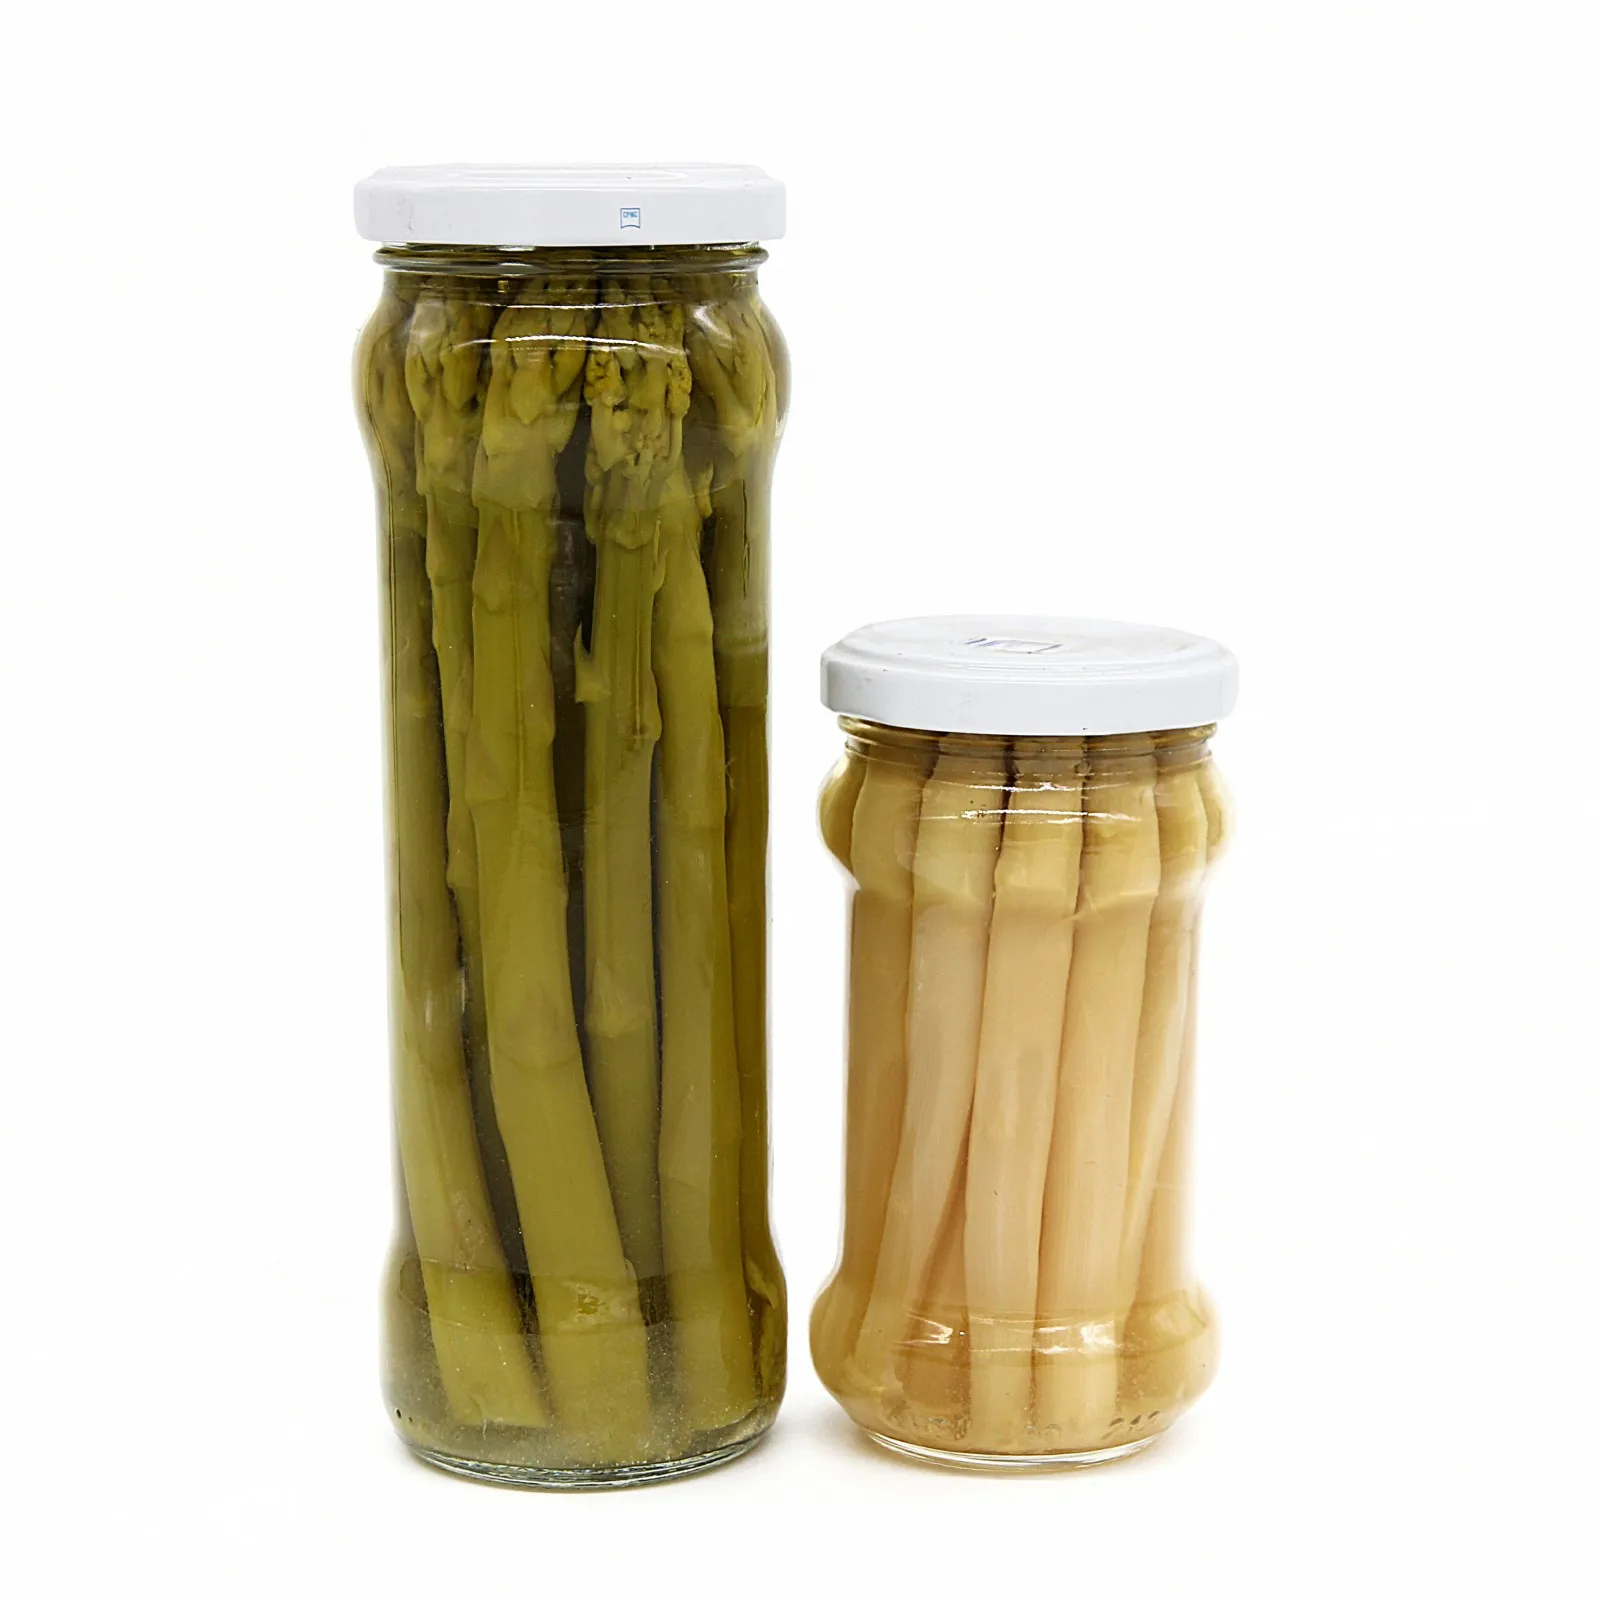 Canned Asparagus In Jar - Buy Canned Green Asparagus,White Canned